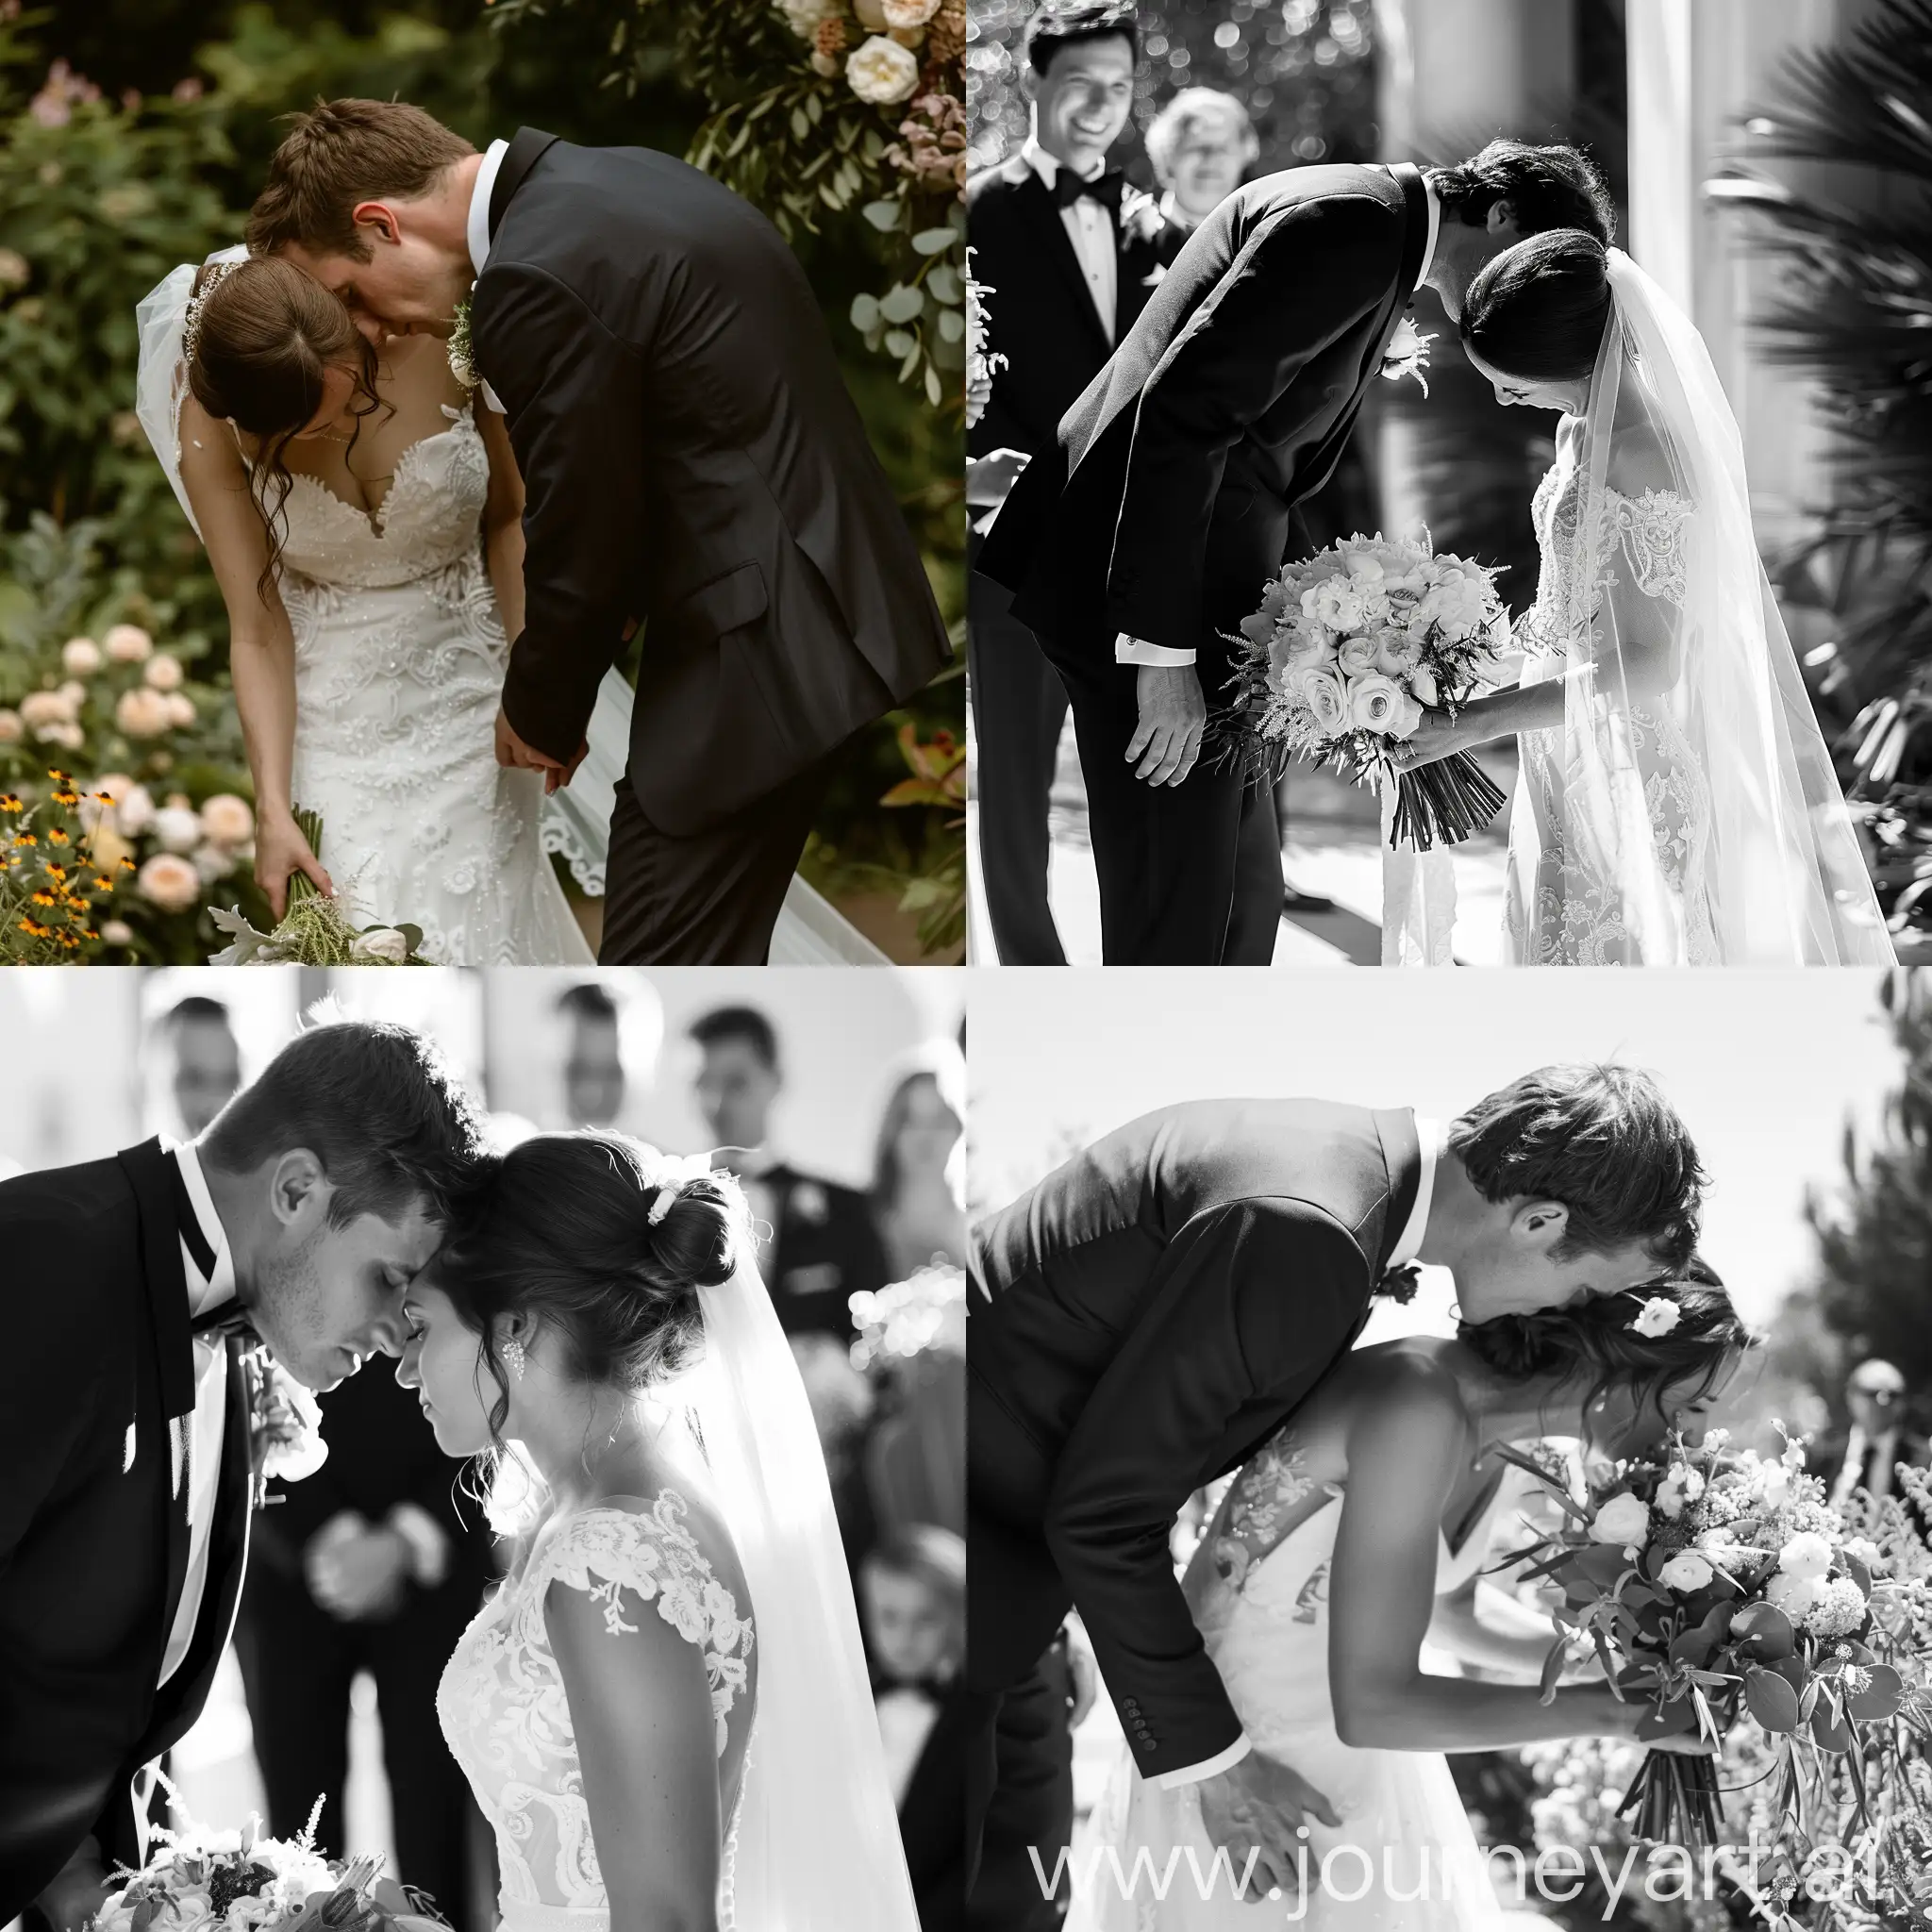 Elegant-Bride-and-Groom-Share-a-Tender-Moment-at-a-Romantic-Wedding-Ceremony